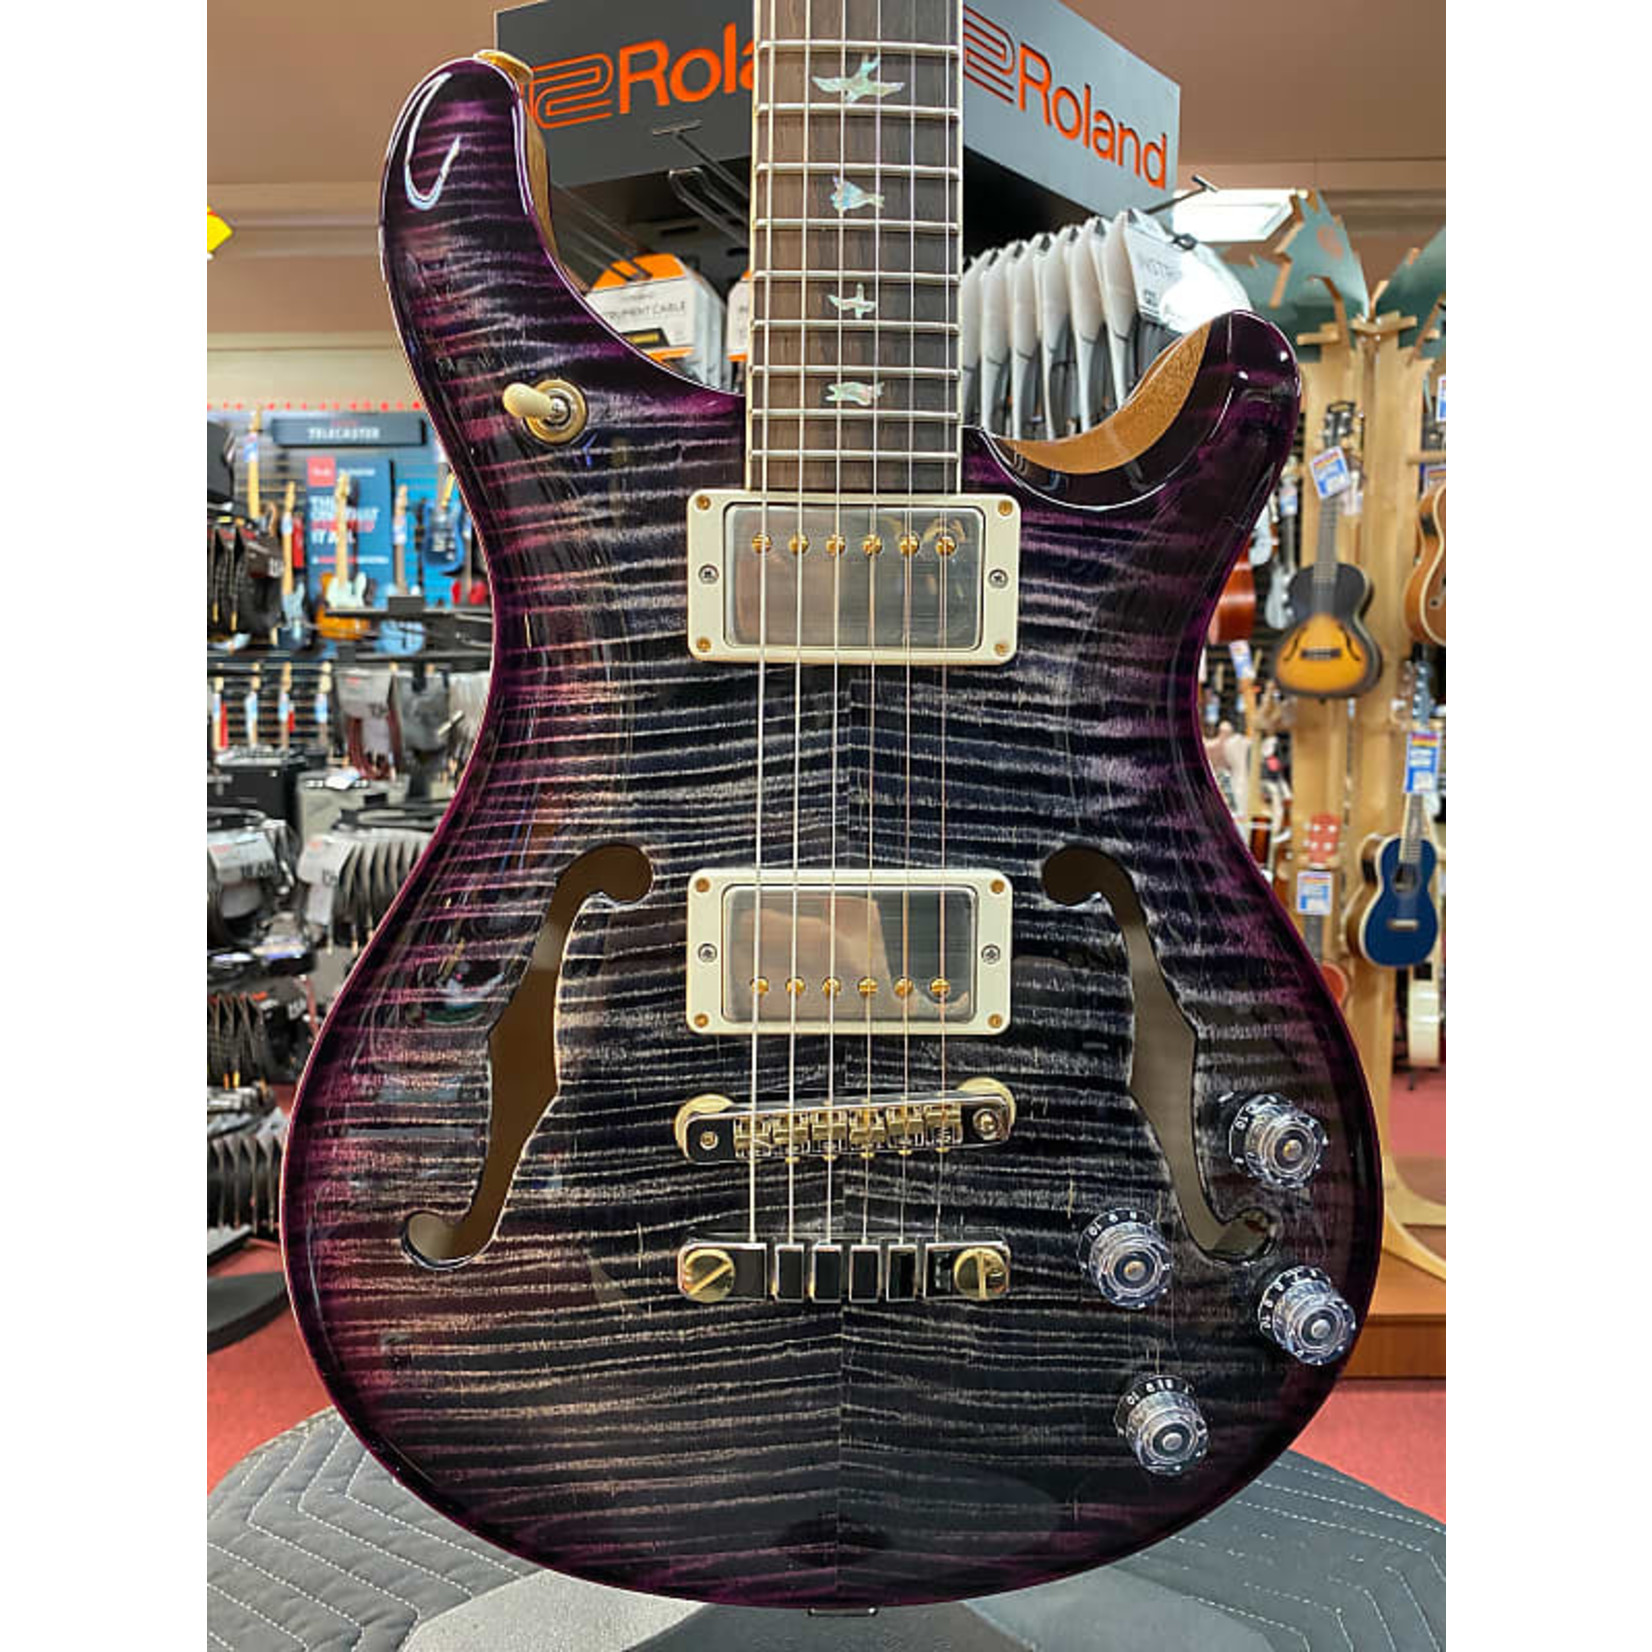 Paul Reed Smith Paul Reed Smith McCarty 594 Hollowbody II - Charcoal Violet Wrap - Brazilian FB, 10 Top